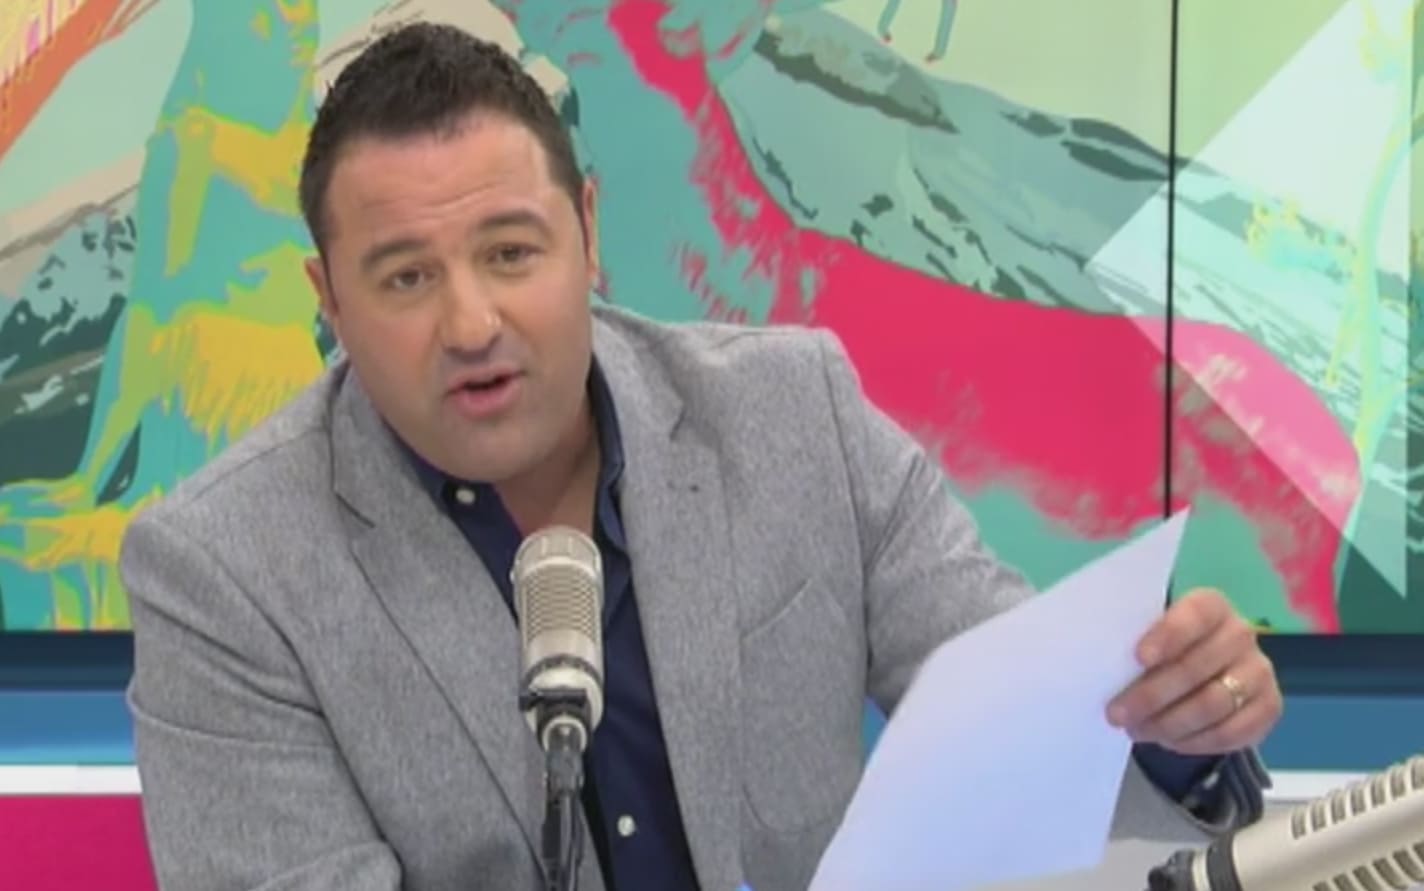 TV3's Duncan Garner reads Sky's statement announcing free-to-air coverage of the Americas Cup.